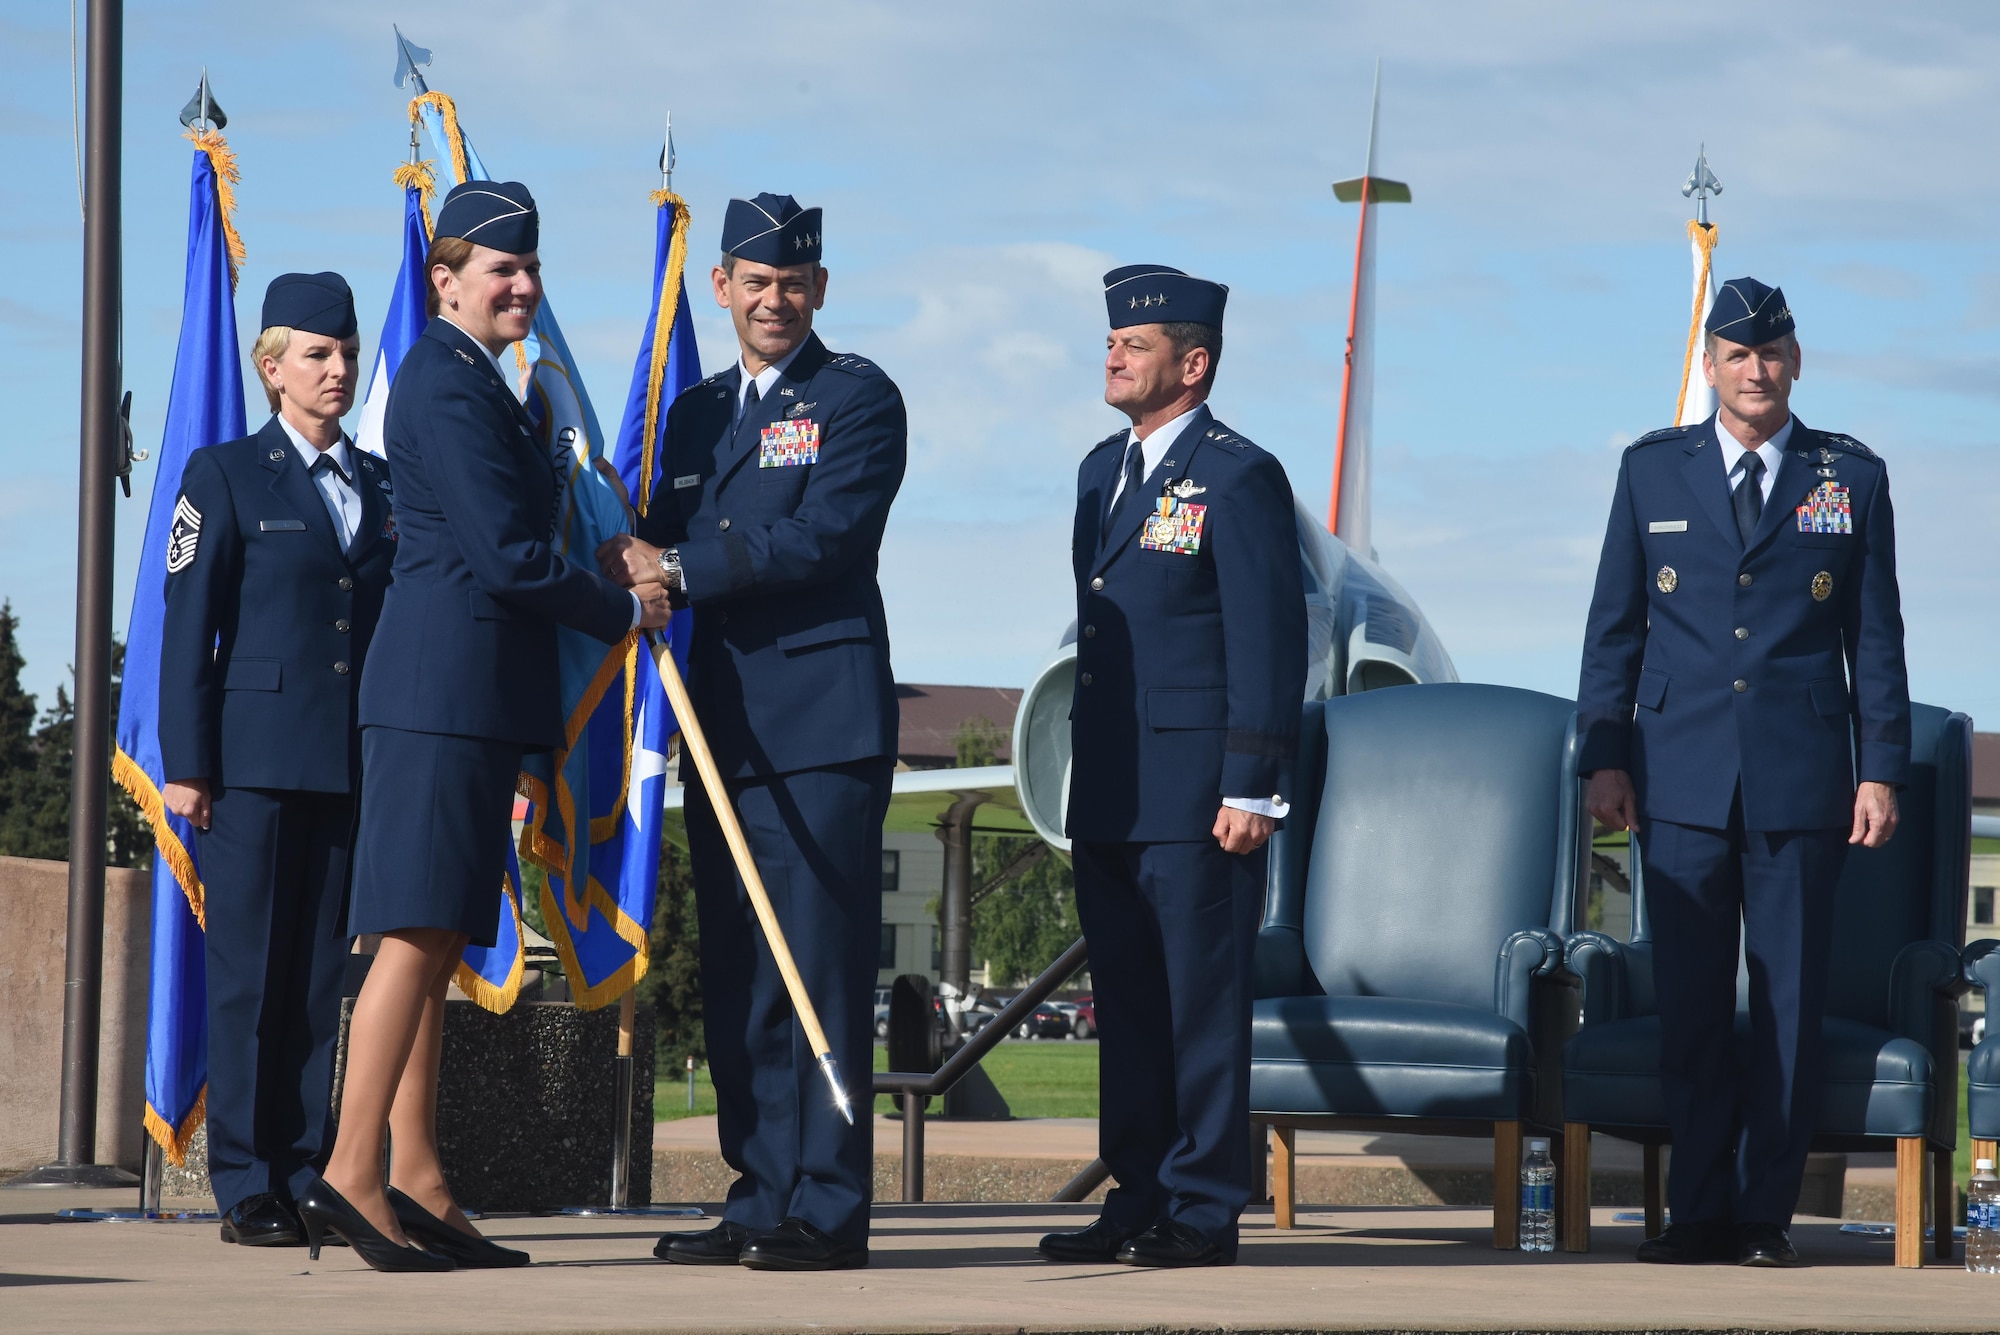 U.S. Air Force Gen. Lori Robinson, North American Aerospace Defense Command and U.S. Northern Command commander gives command of Alaskan NORAD Region and Alaskan Command to U.S. Air Force Lt. Gen. Kenneth Wilsbach during a change of command ceremony Aug. 16 at Joint Base Elmendorf-Richardson, Alaska.  Wilsbach also assumed command of 11th Air Force from Gen. Terrence O'Shaughnessy, Pacific Air Forces commander. Outgoing commander Lt. Gen. Russell Handy retired after more than 30 years of service and relinquished command to Wilsbach.